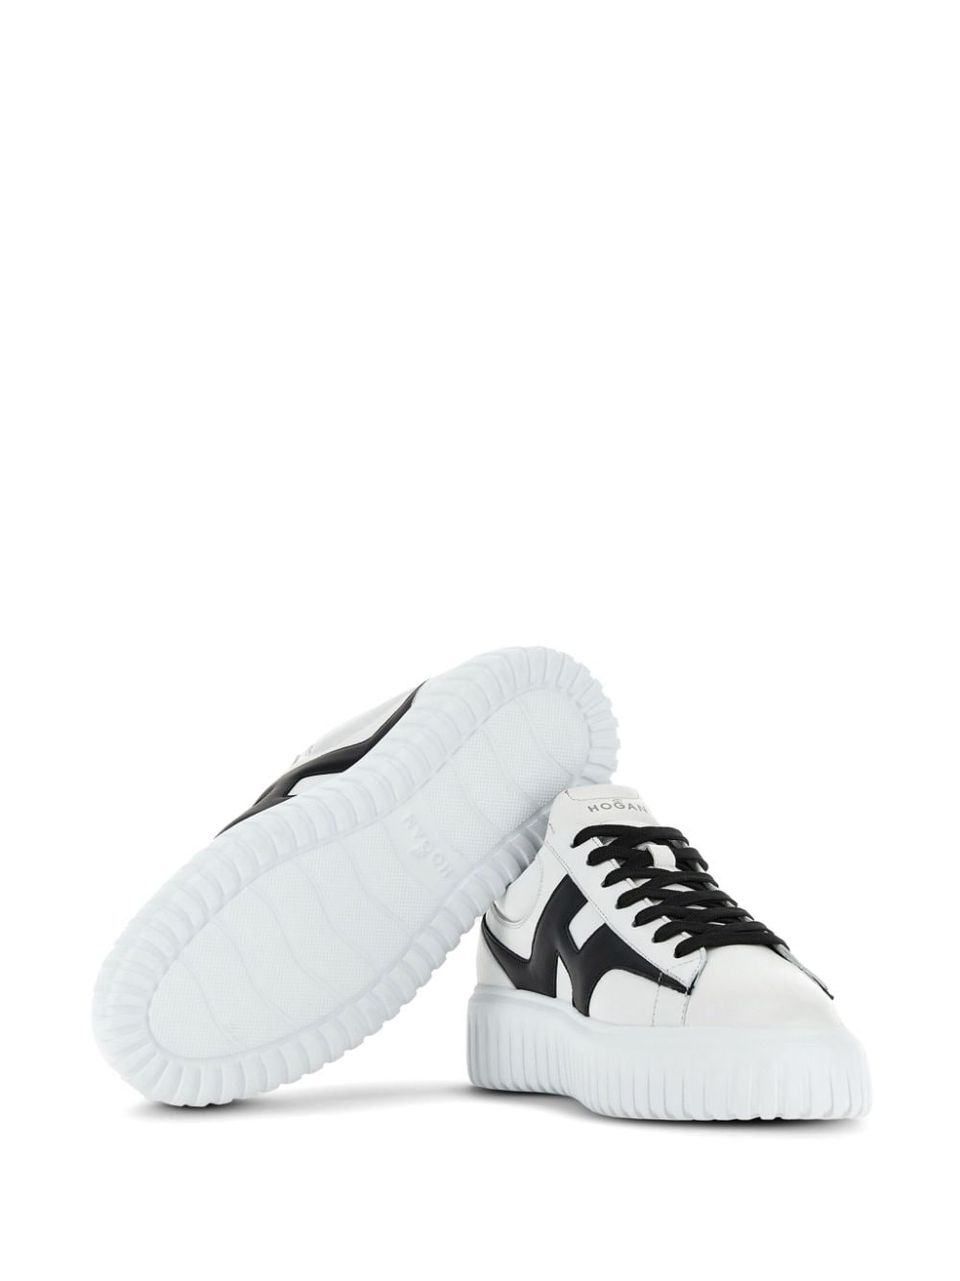 'H-Stripes' sneakers